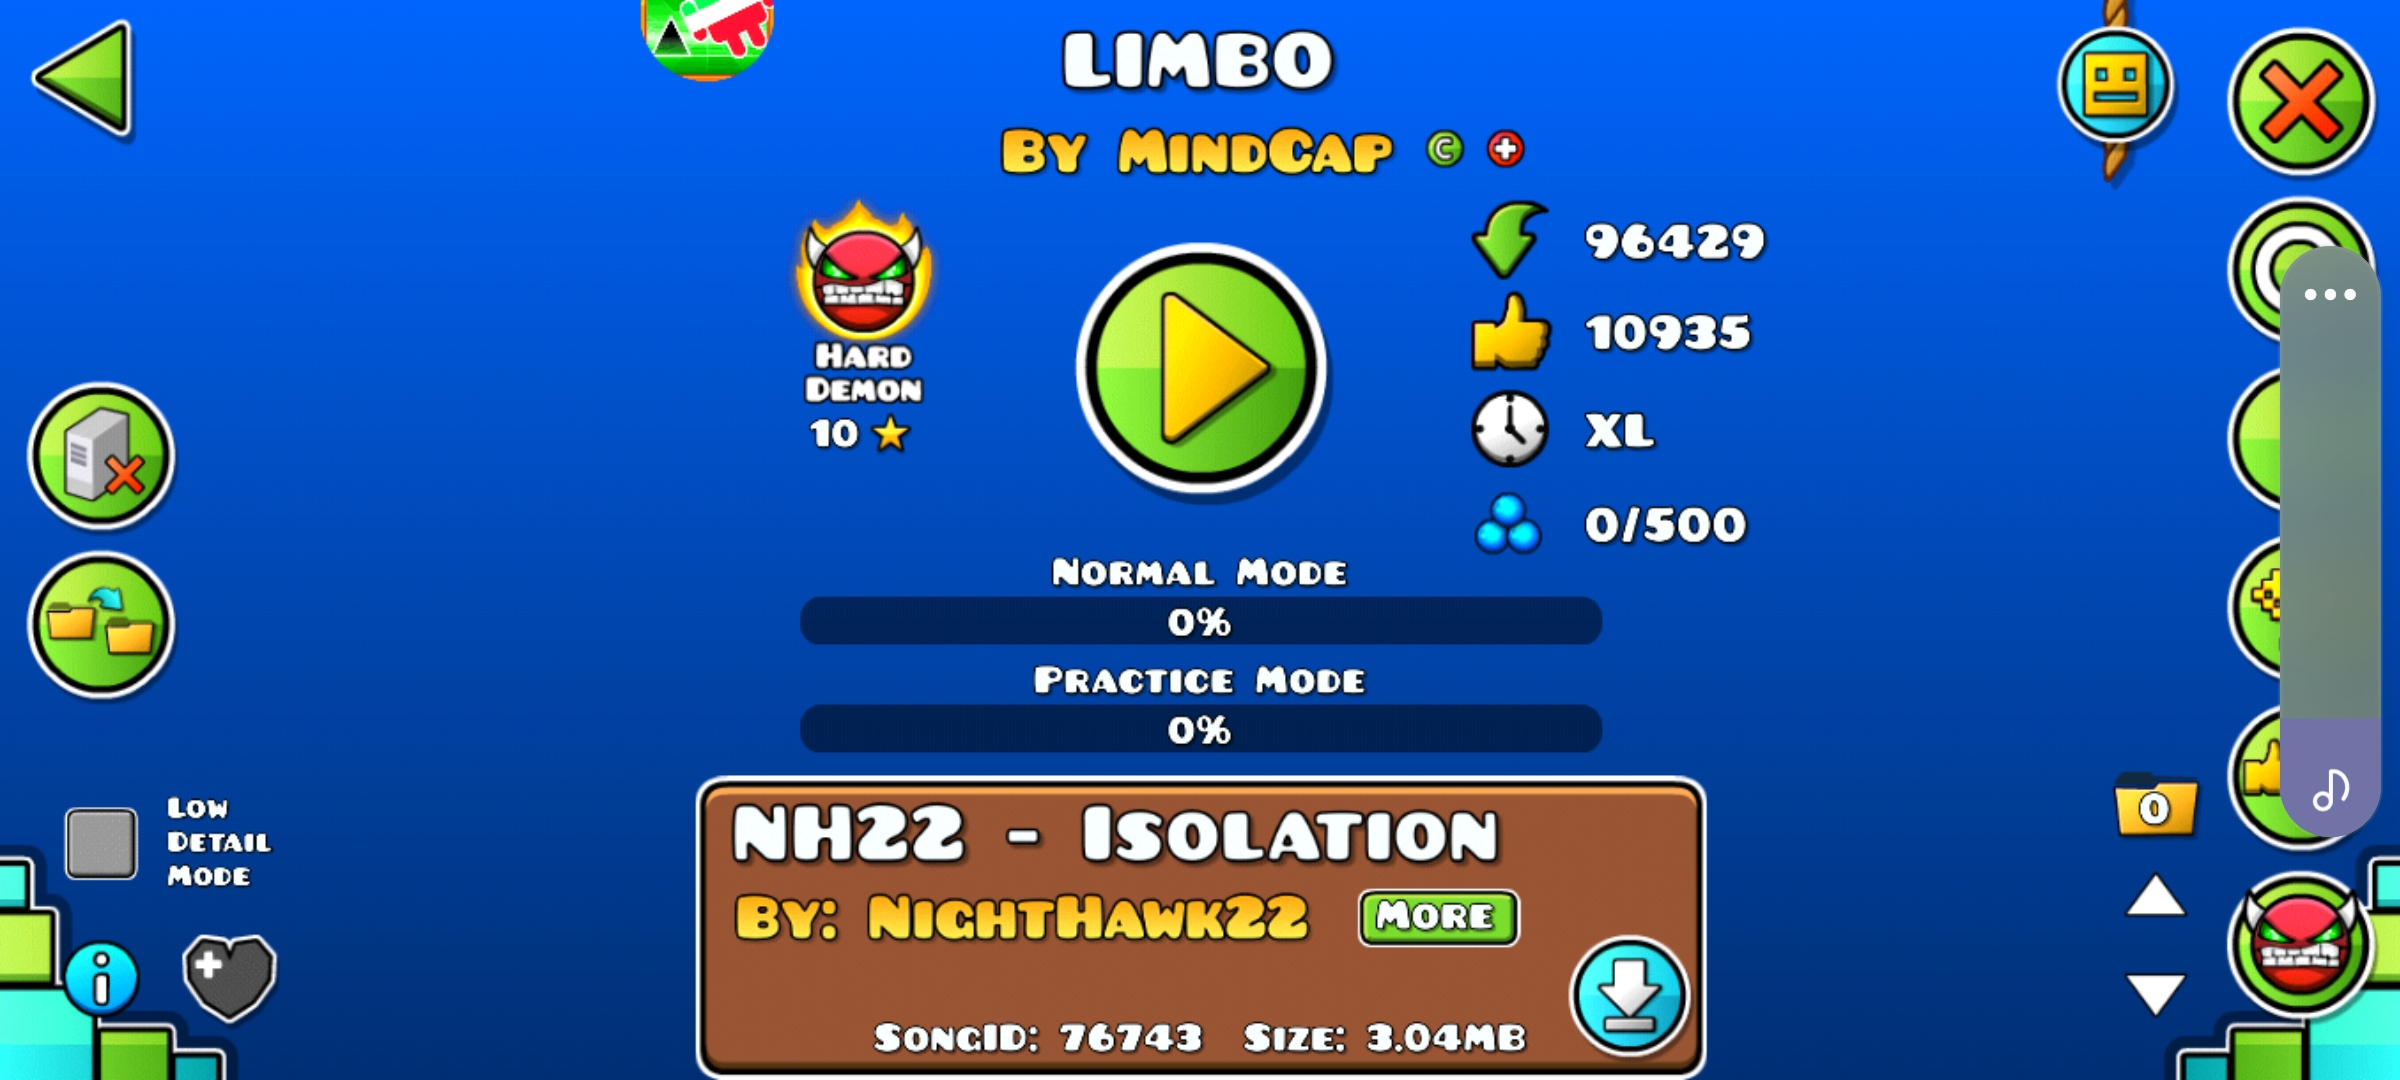 Collab Level and limbo rated | Fandom